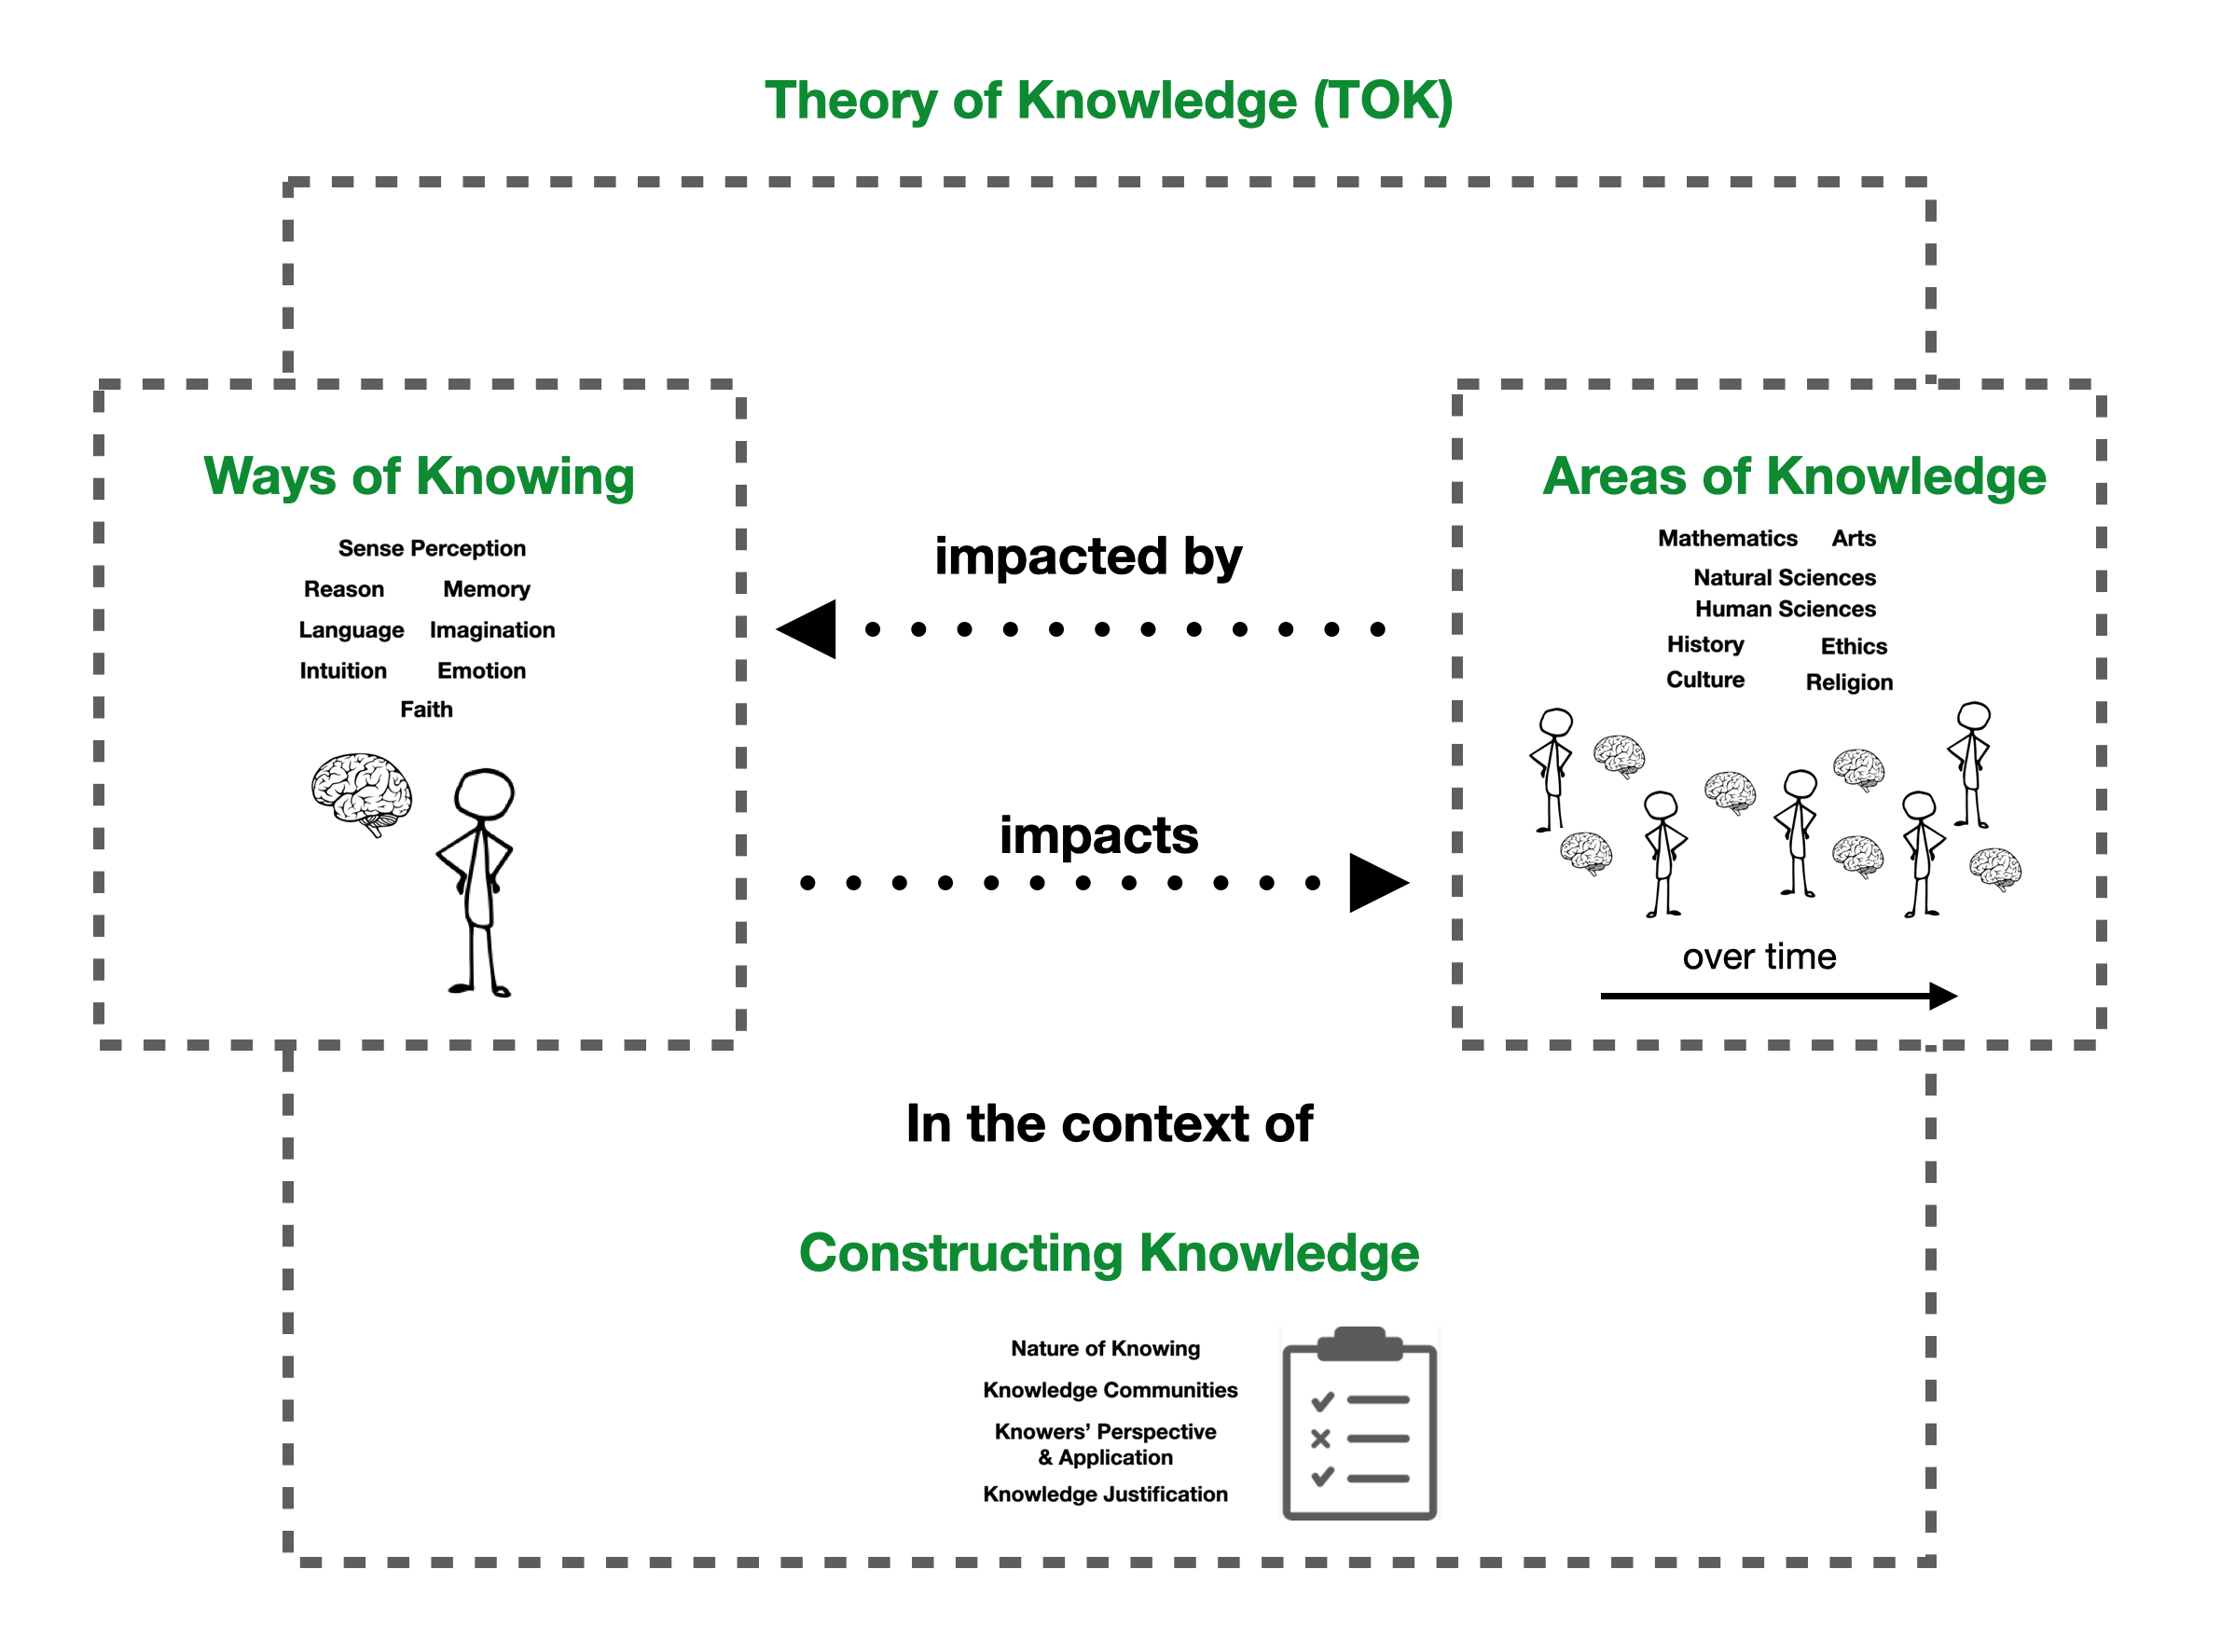 Constructing Knowledge